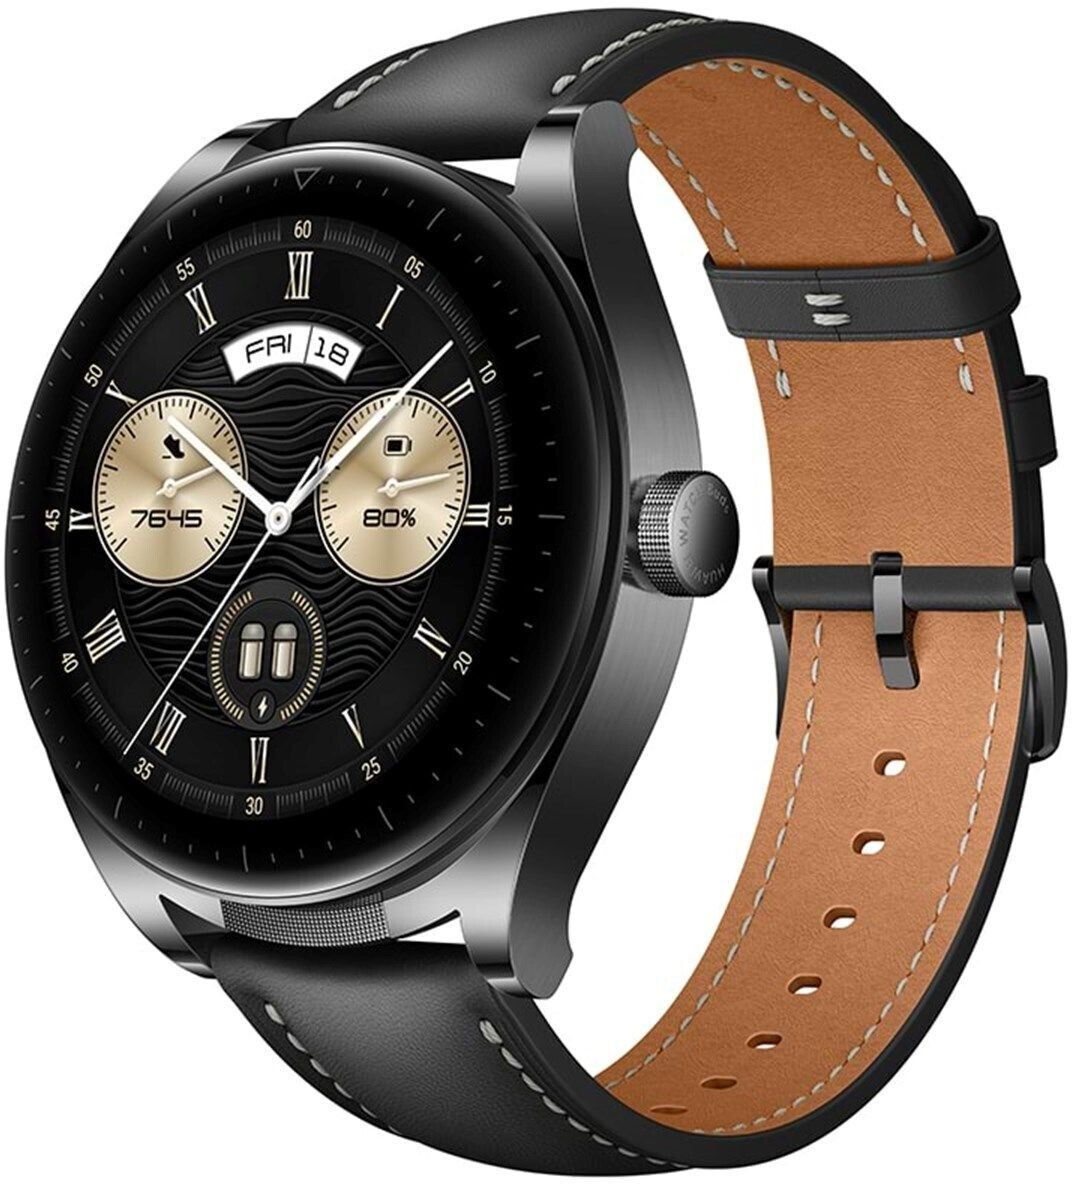 Buy Huawei Watch Buds from £339.90 (Today) – Best Deals on